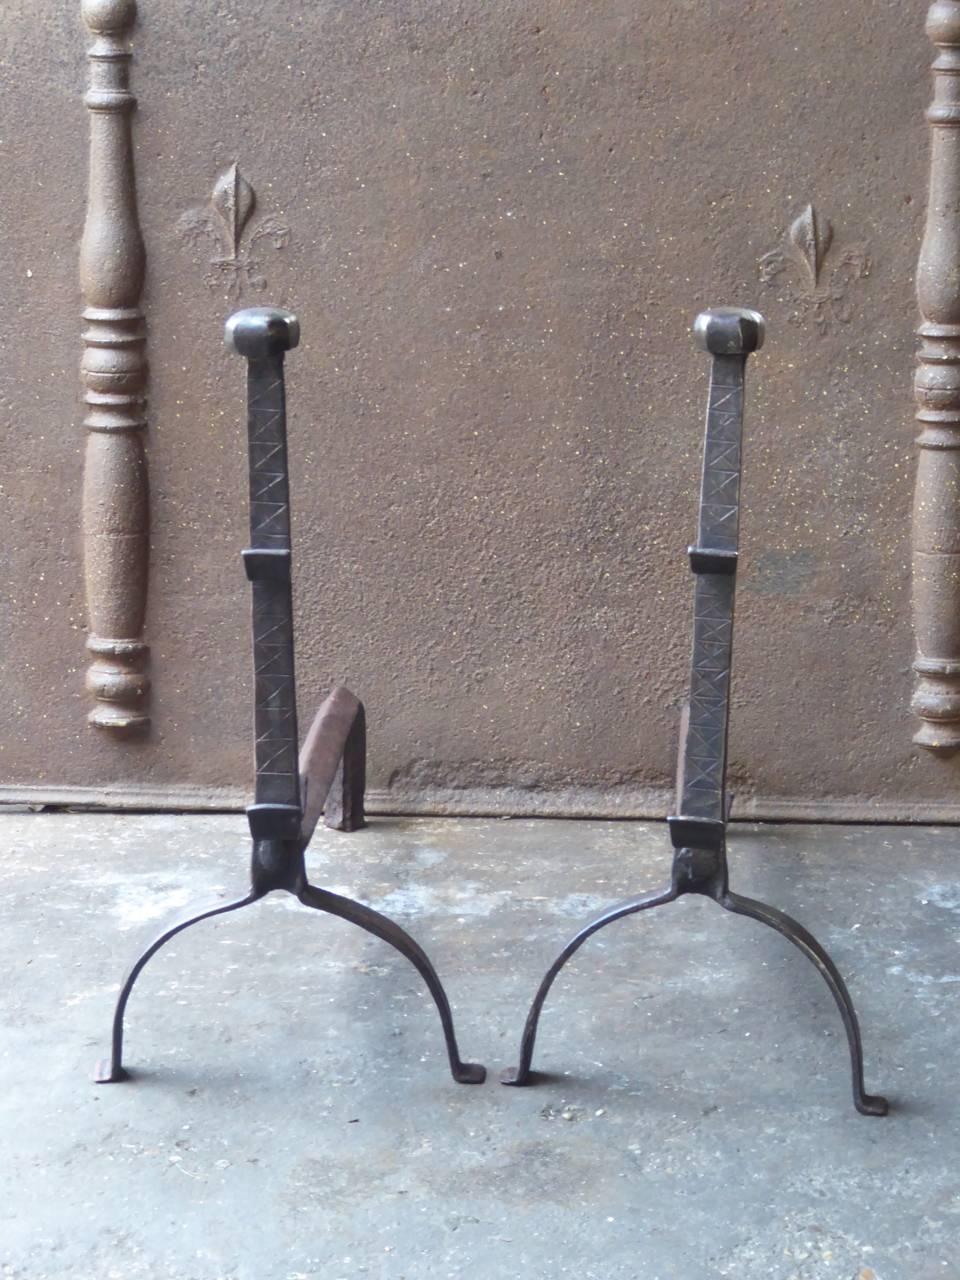 17th century French Gothic andirons made of wrought iron.

The condition is good.